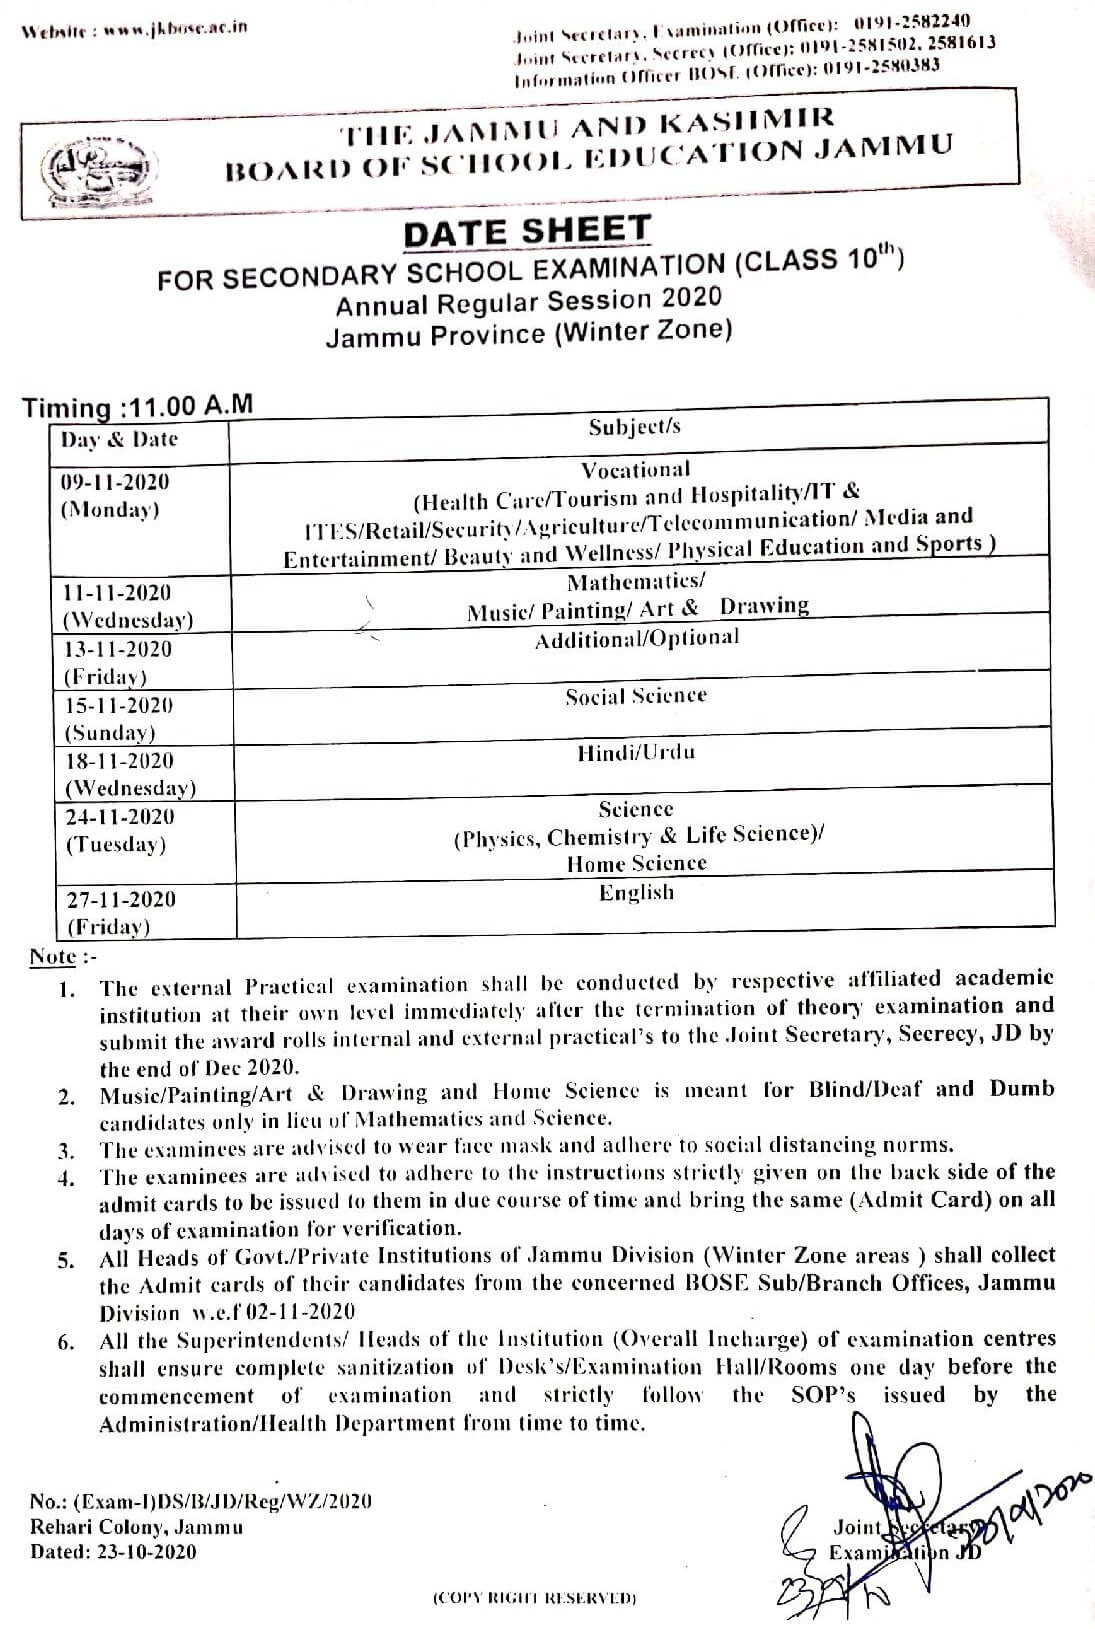 JKBOSE Date Sheet for Class 10th Annual Exam 2020 (Jammu Division)